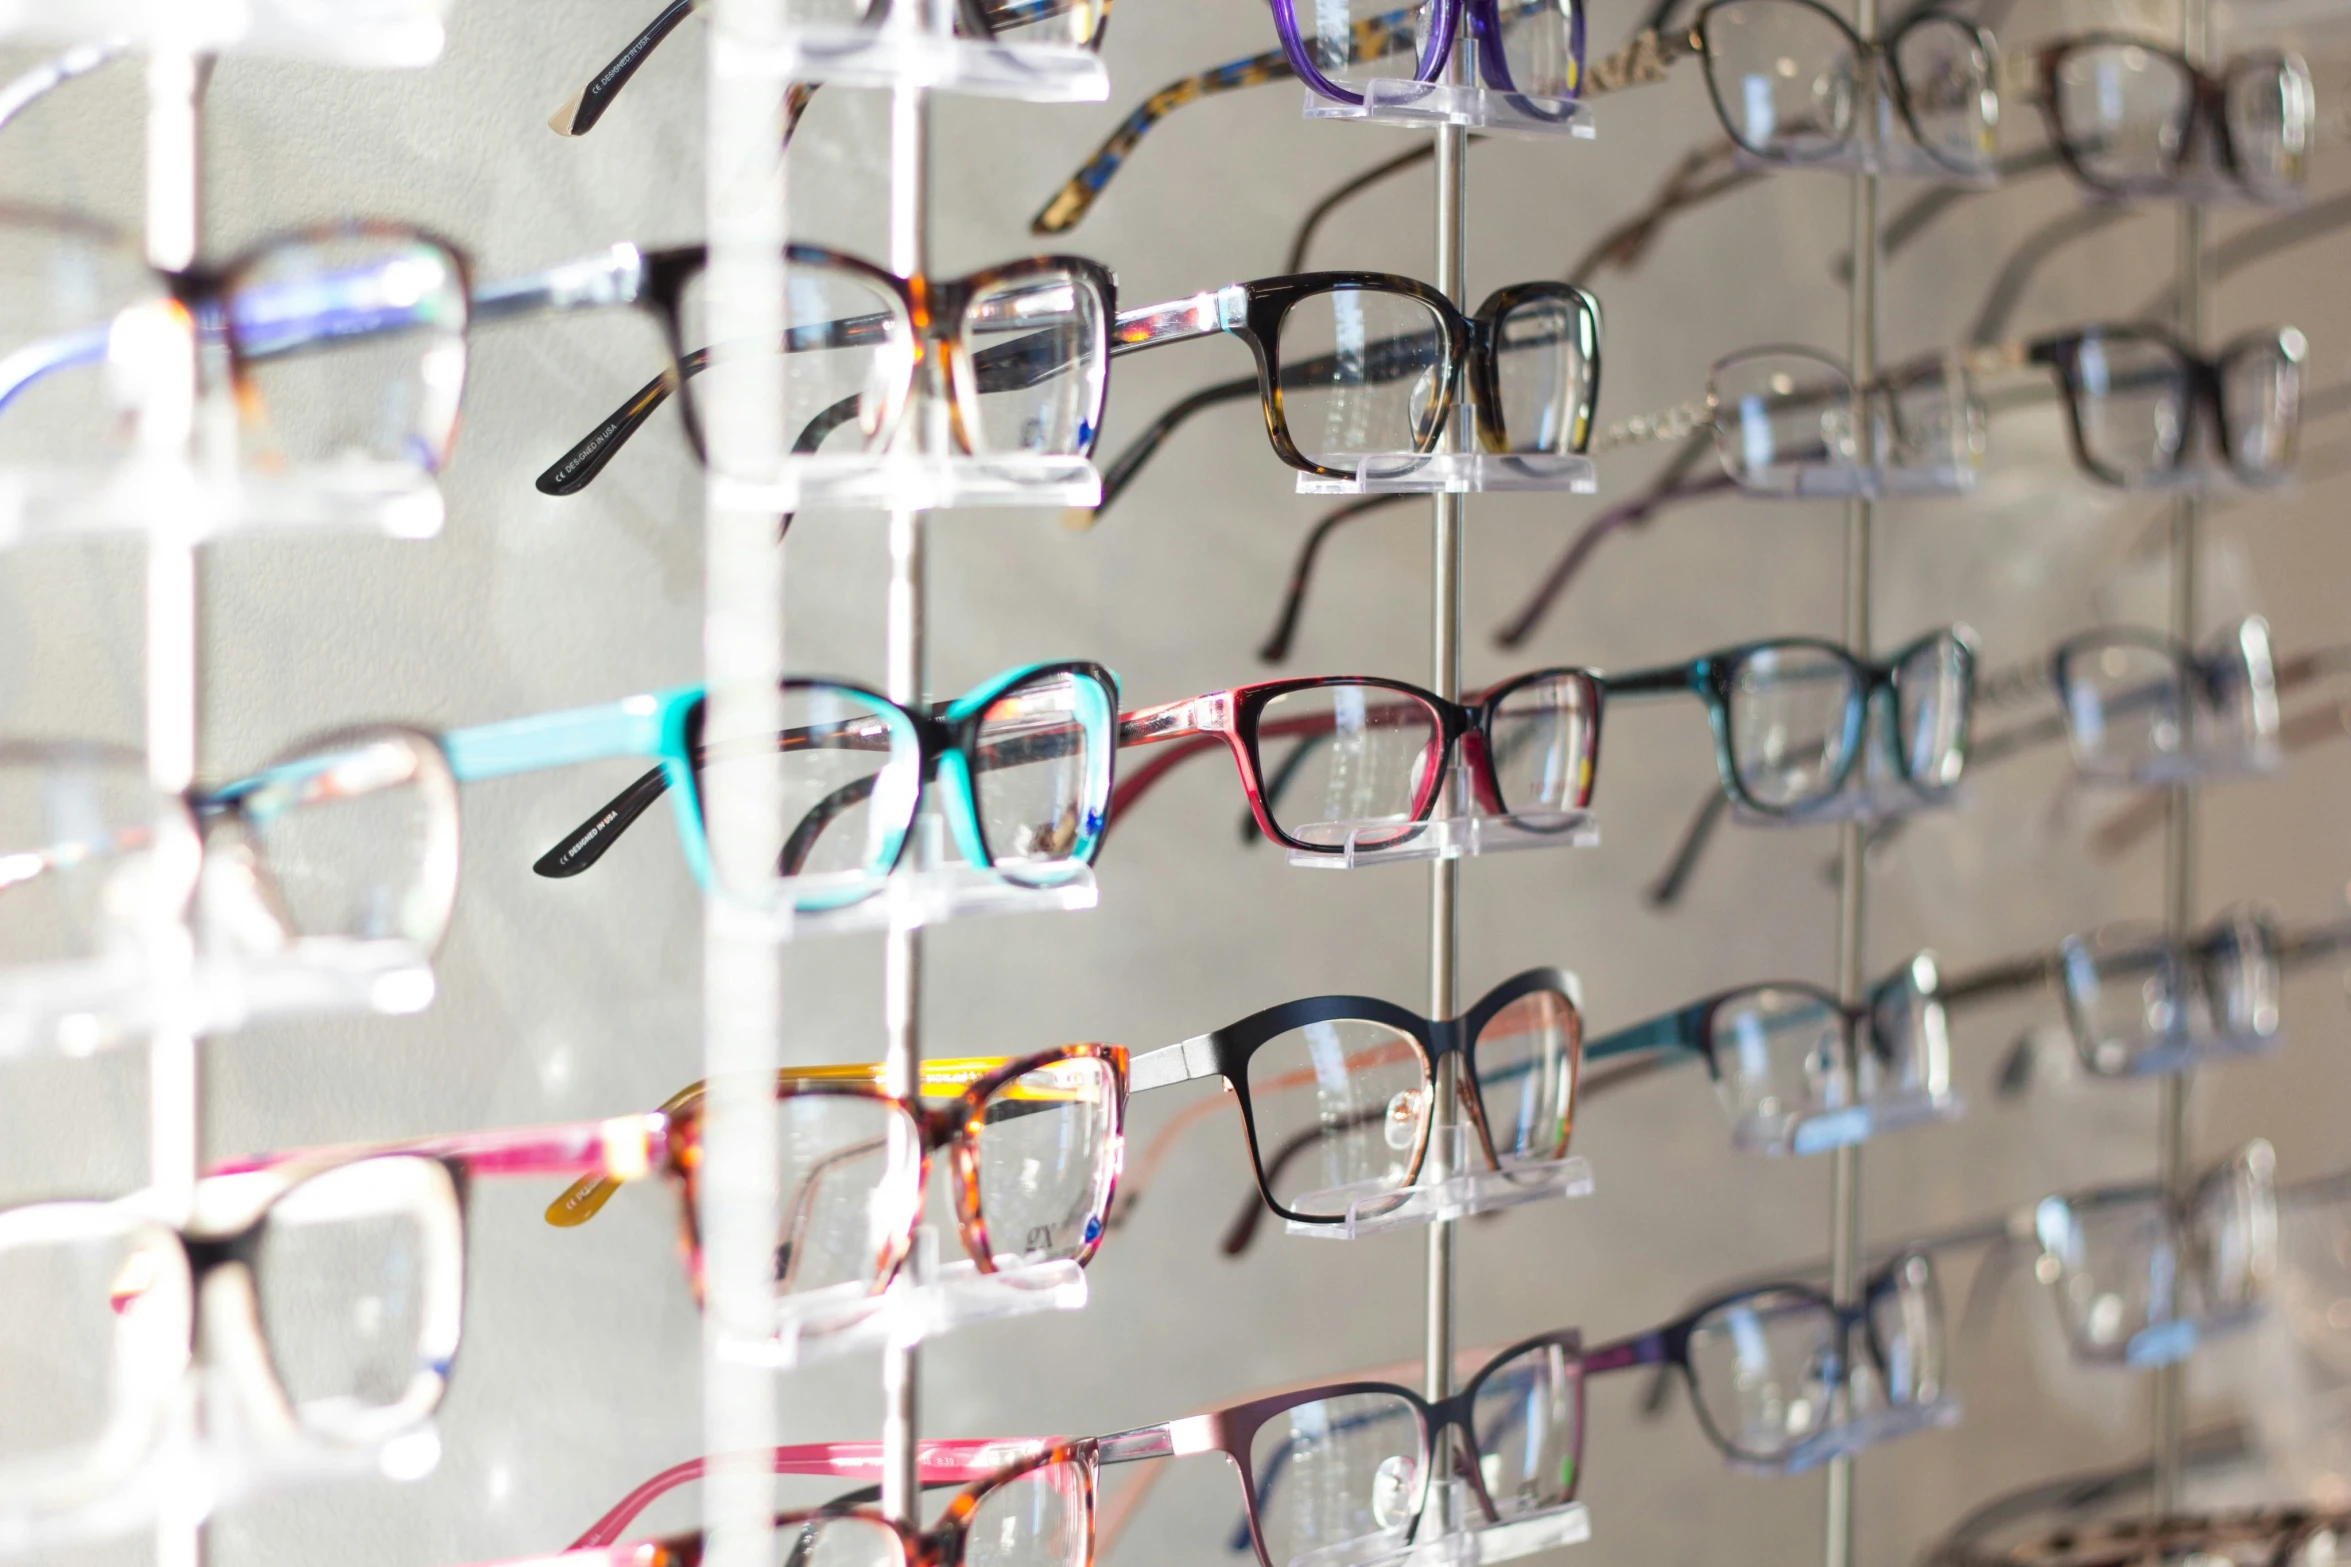 many pairs of glasses are in the shape of glasses